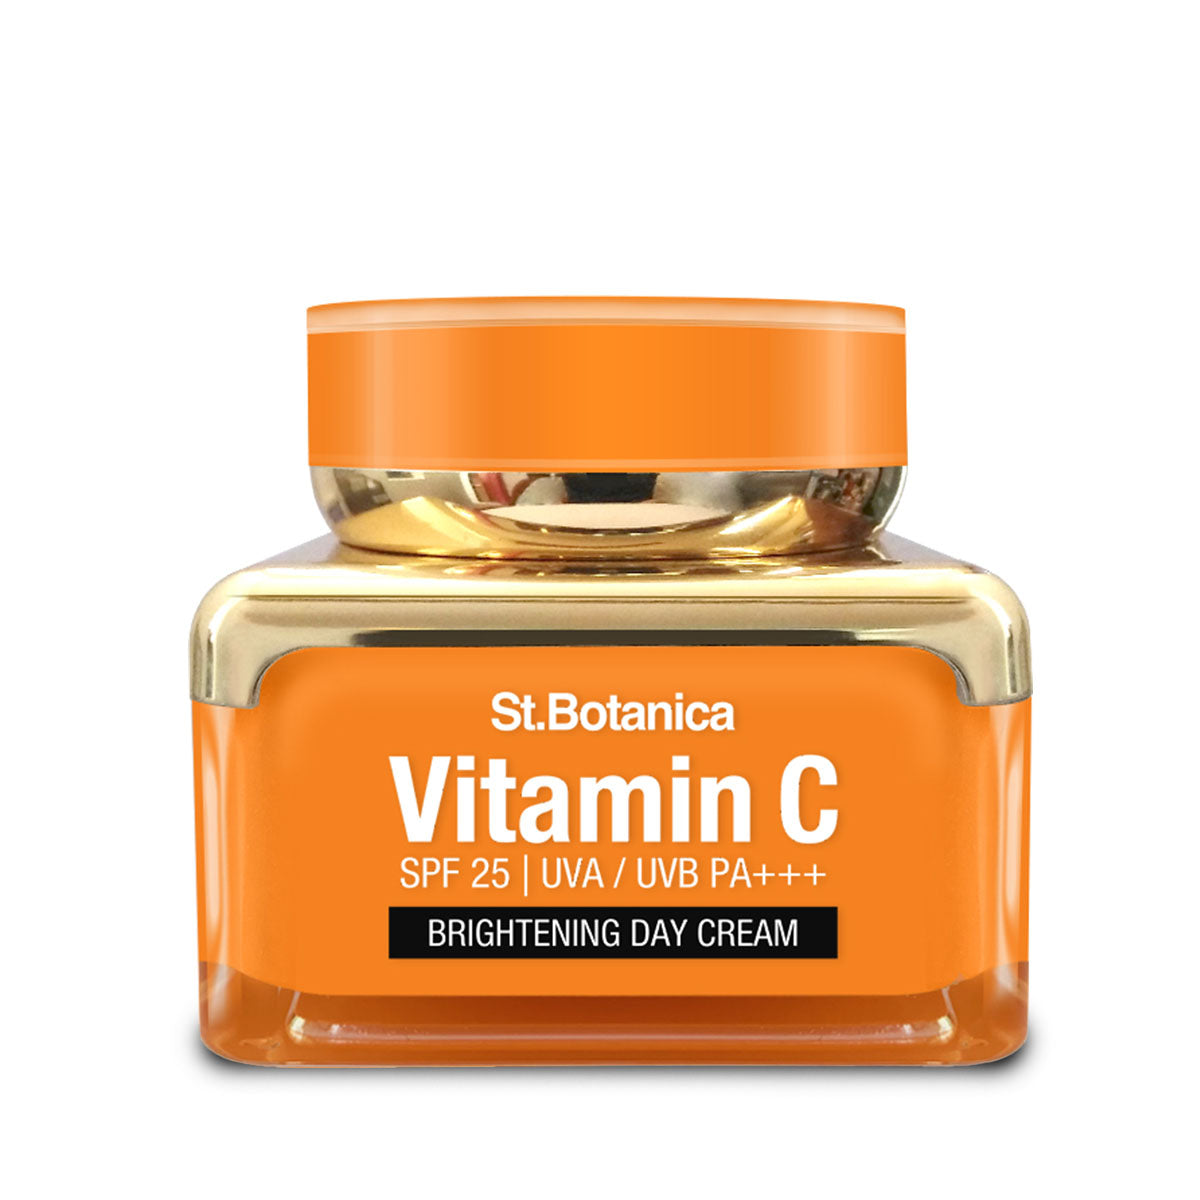 St.Botanica Vitamin C Brightening Day Cream With SPF 30 UVA/UVB PA+++ For Radiant Youthful Looking Skin, 50 g